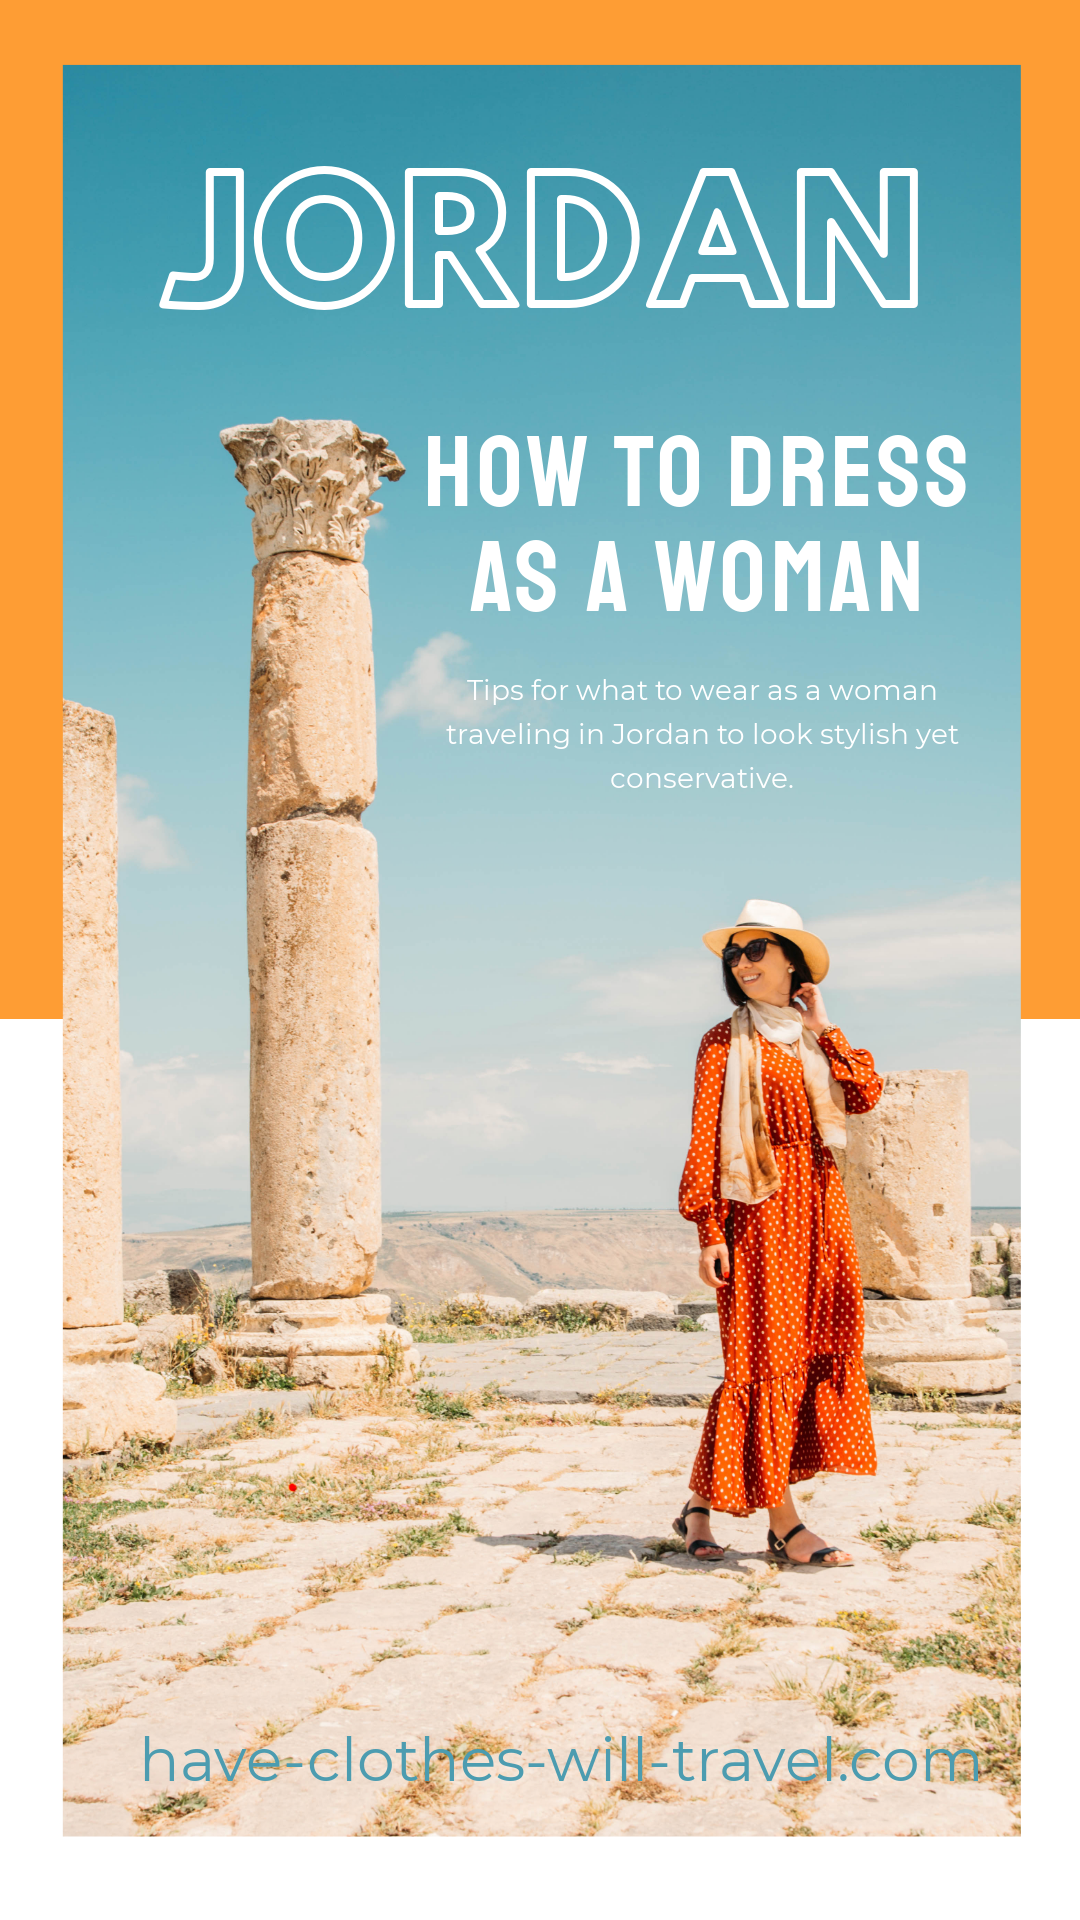 An image of a woman posing with ruins in Jordan has a white and orange border, and text across the top of the image. Multiple lines of white text read, "Jordan" at the top,  "how to dress as a woman" in the middle, and "tips for what to wear as a woman travelling in Jordan to look stylish yet conservative" in small text.